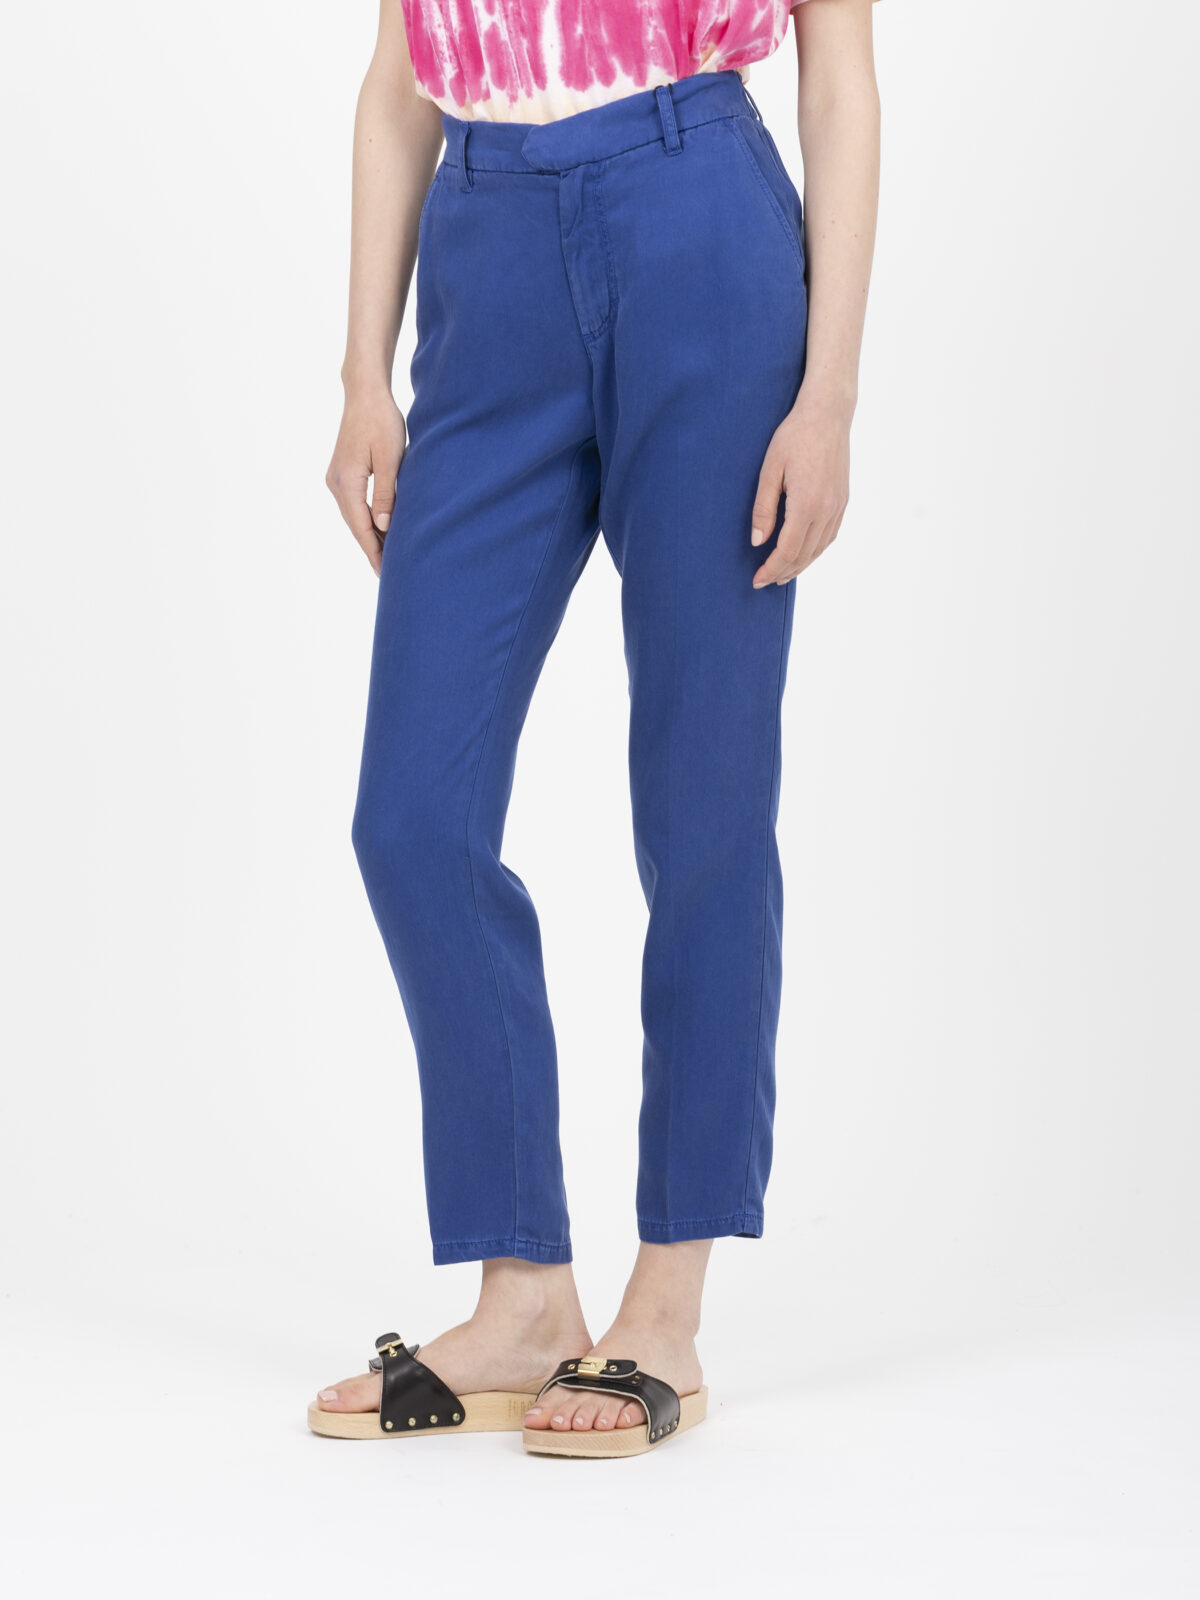 thea-blue-electric-trousers-carrot-fit-chino-tencel-labdip-matchboxathens